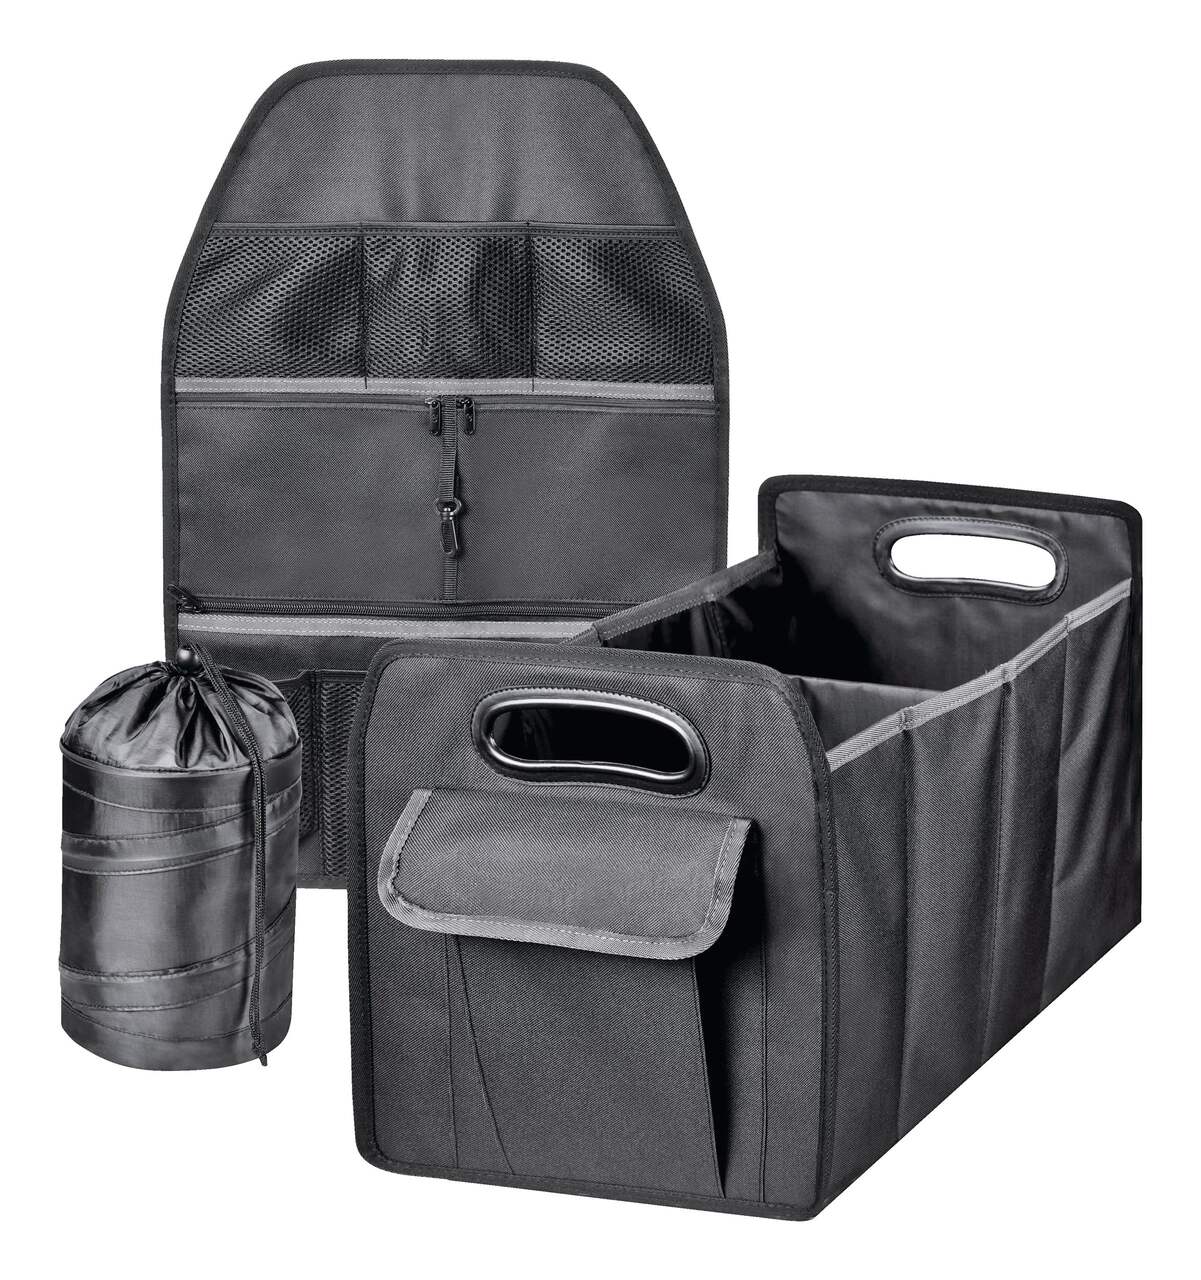 https://media-www.canadiantire.ca/product/automotive/car-care-accessories/auto-accessories/0379949/autotrends-car-kit-trunk-trash-bin-back-seat-organizers-b7221c8f-4a5d-4d99-a5ec-f415e71532dc-jpgrendition.jpg?imdensity=1&imwidth=640&impolicy=mZoom